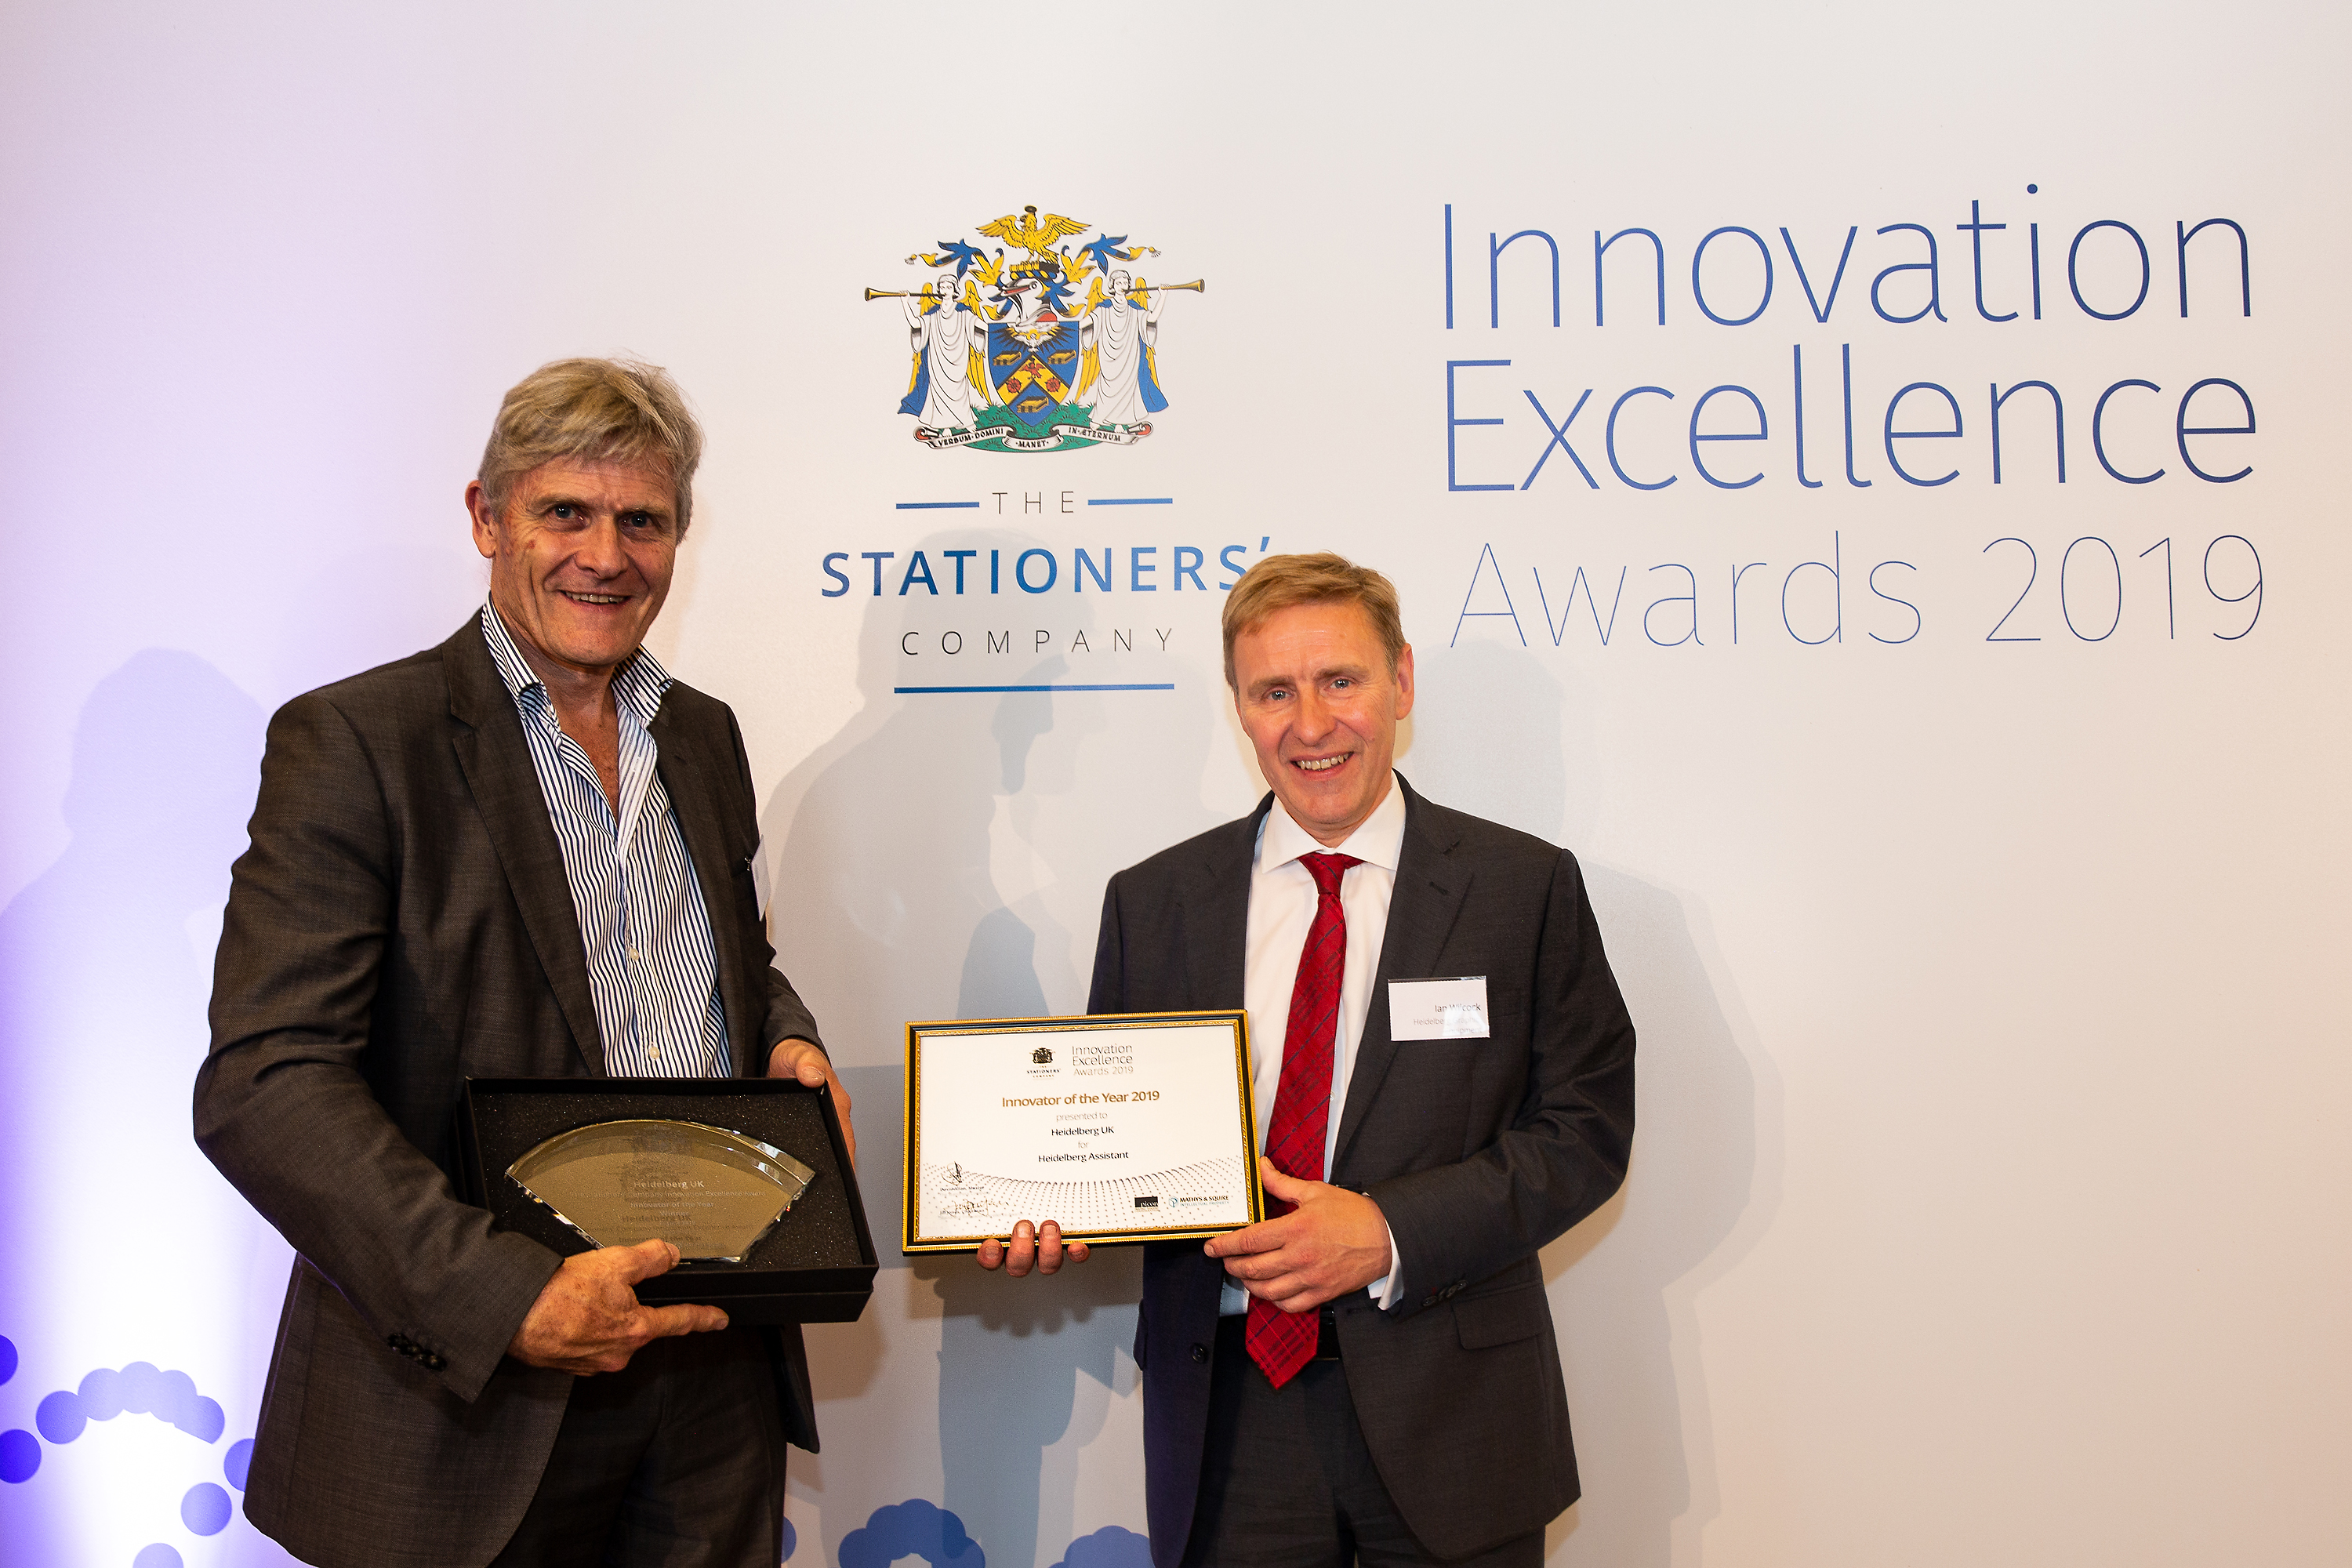 Stationers’ Company Innovation Excellence Awards celebrate product and customer experience innovations